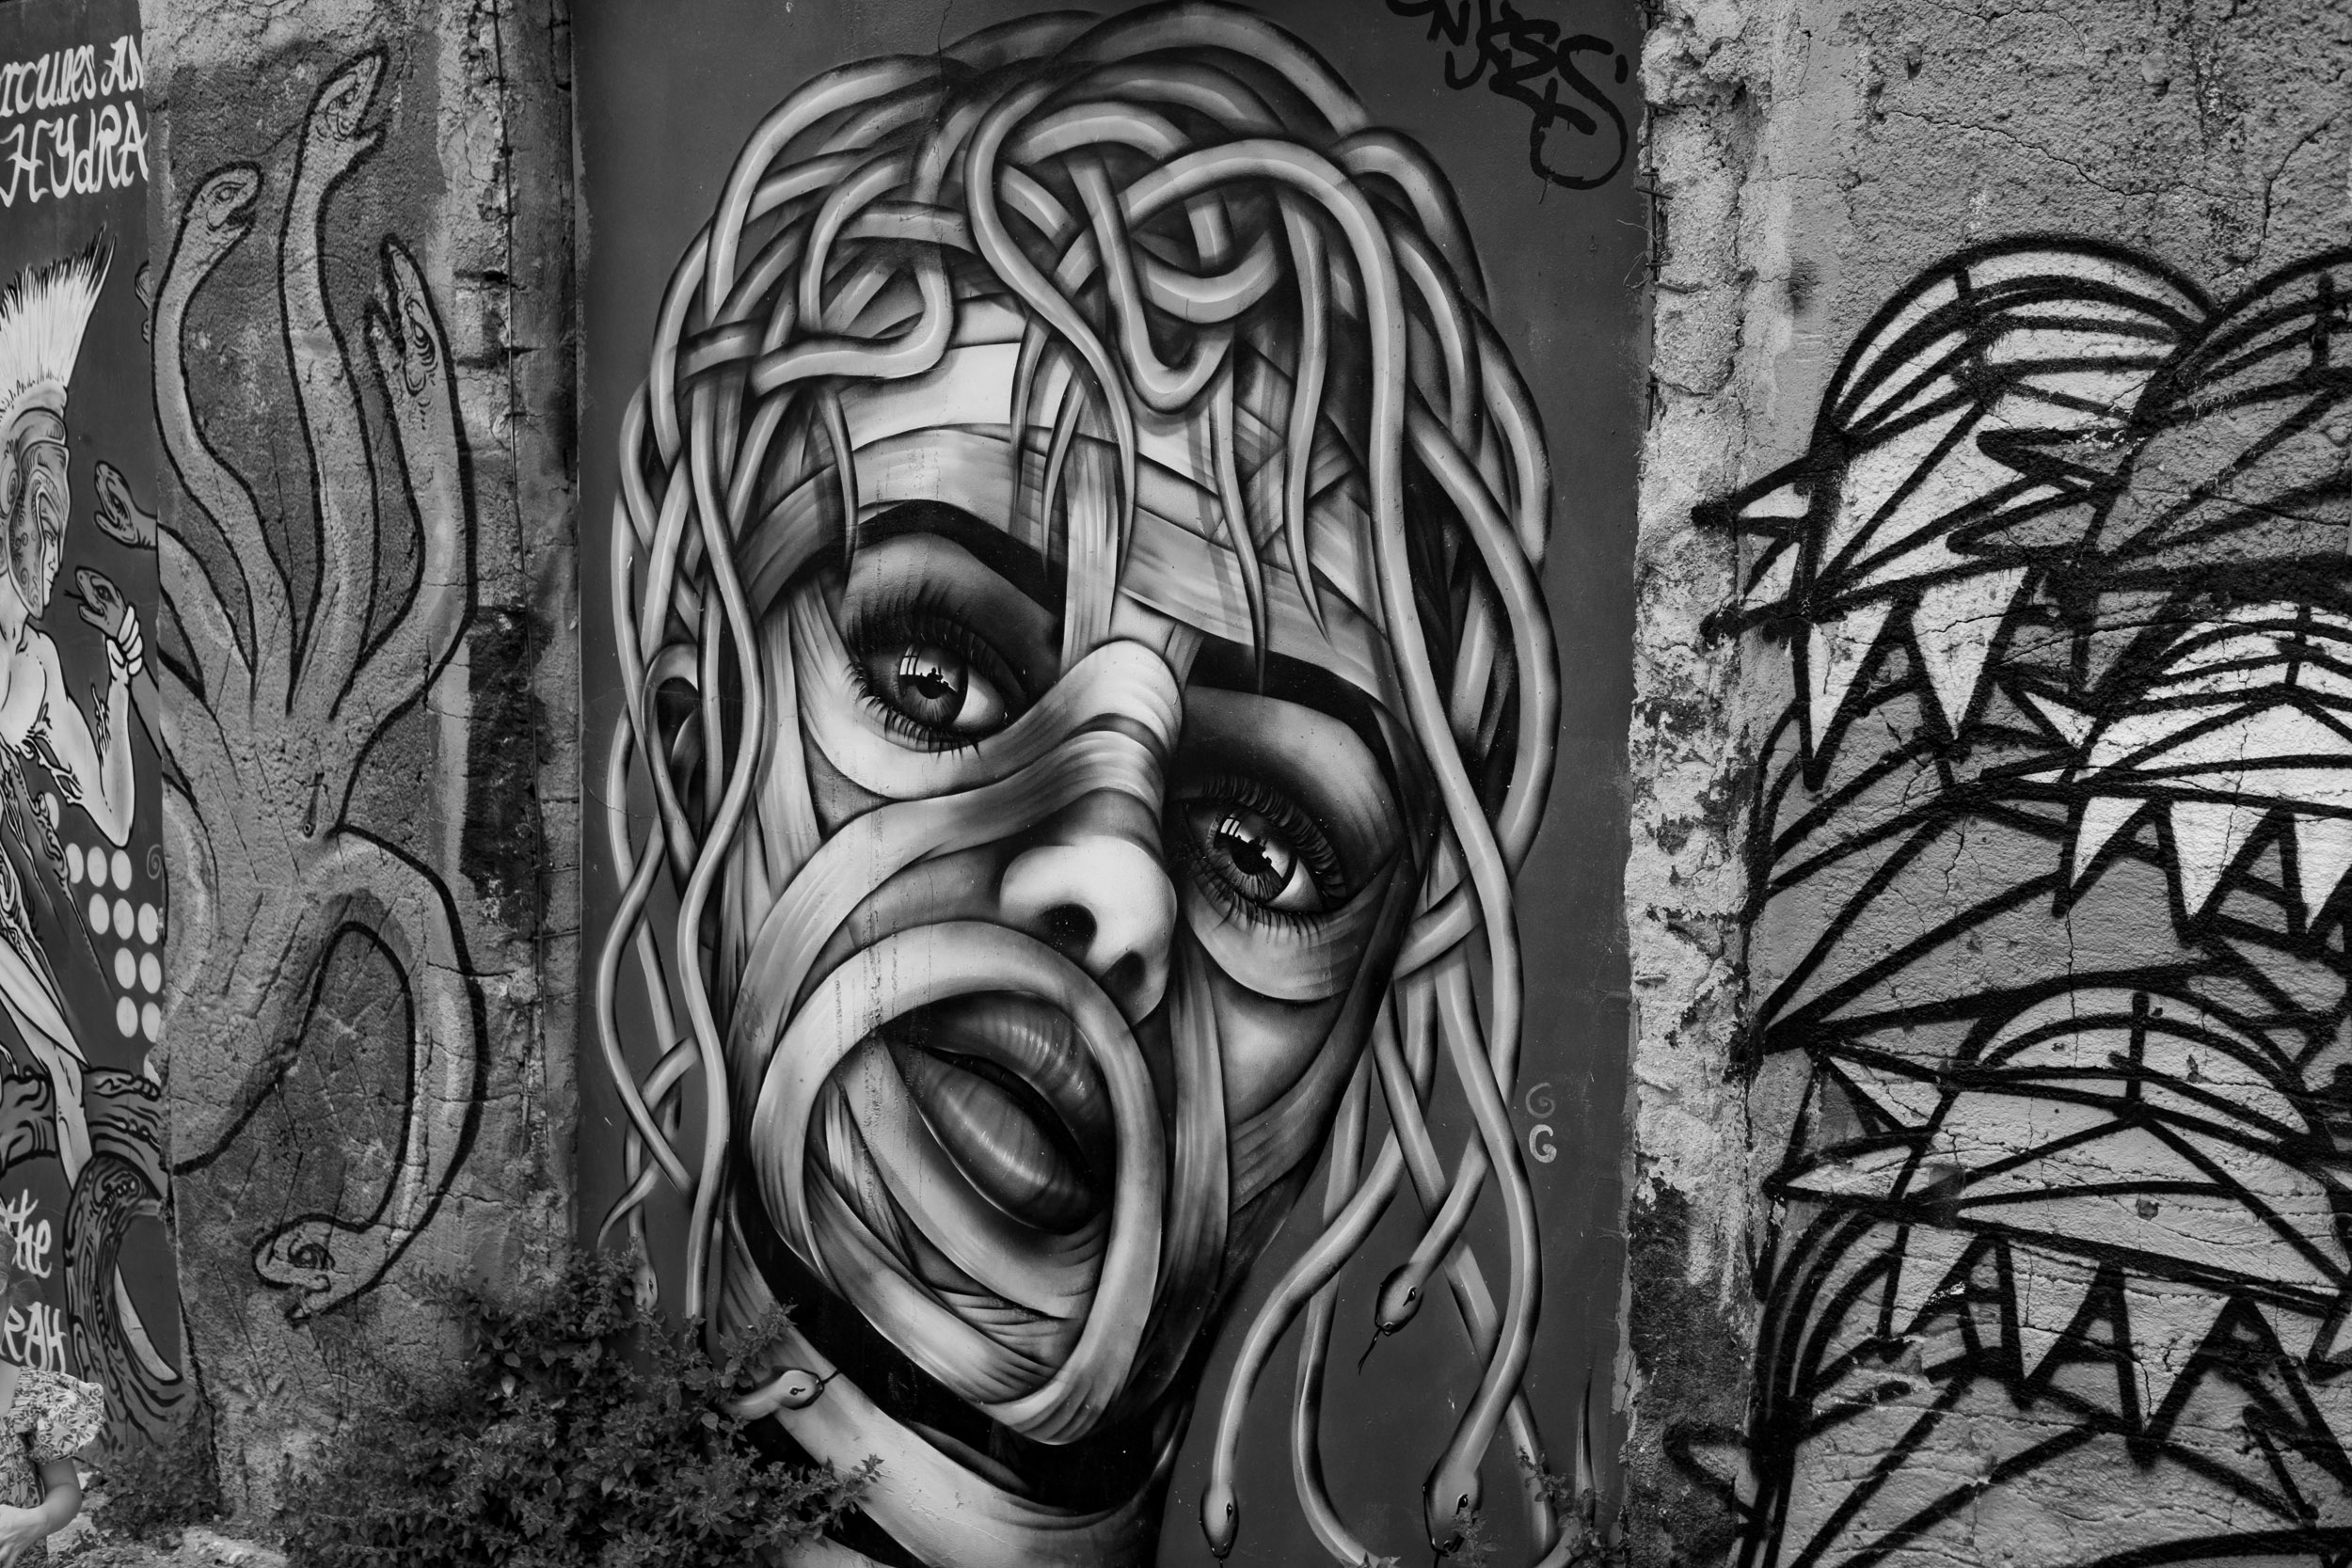 A spray painted medusa graffito in the streets of Athens.